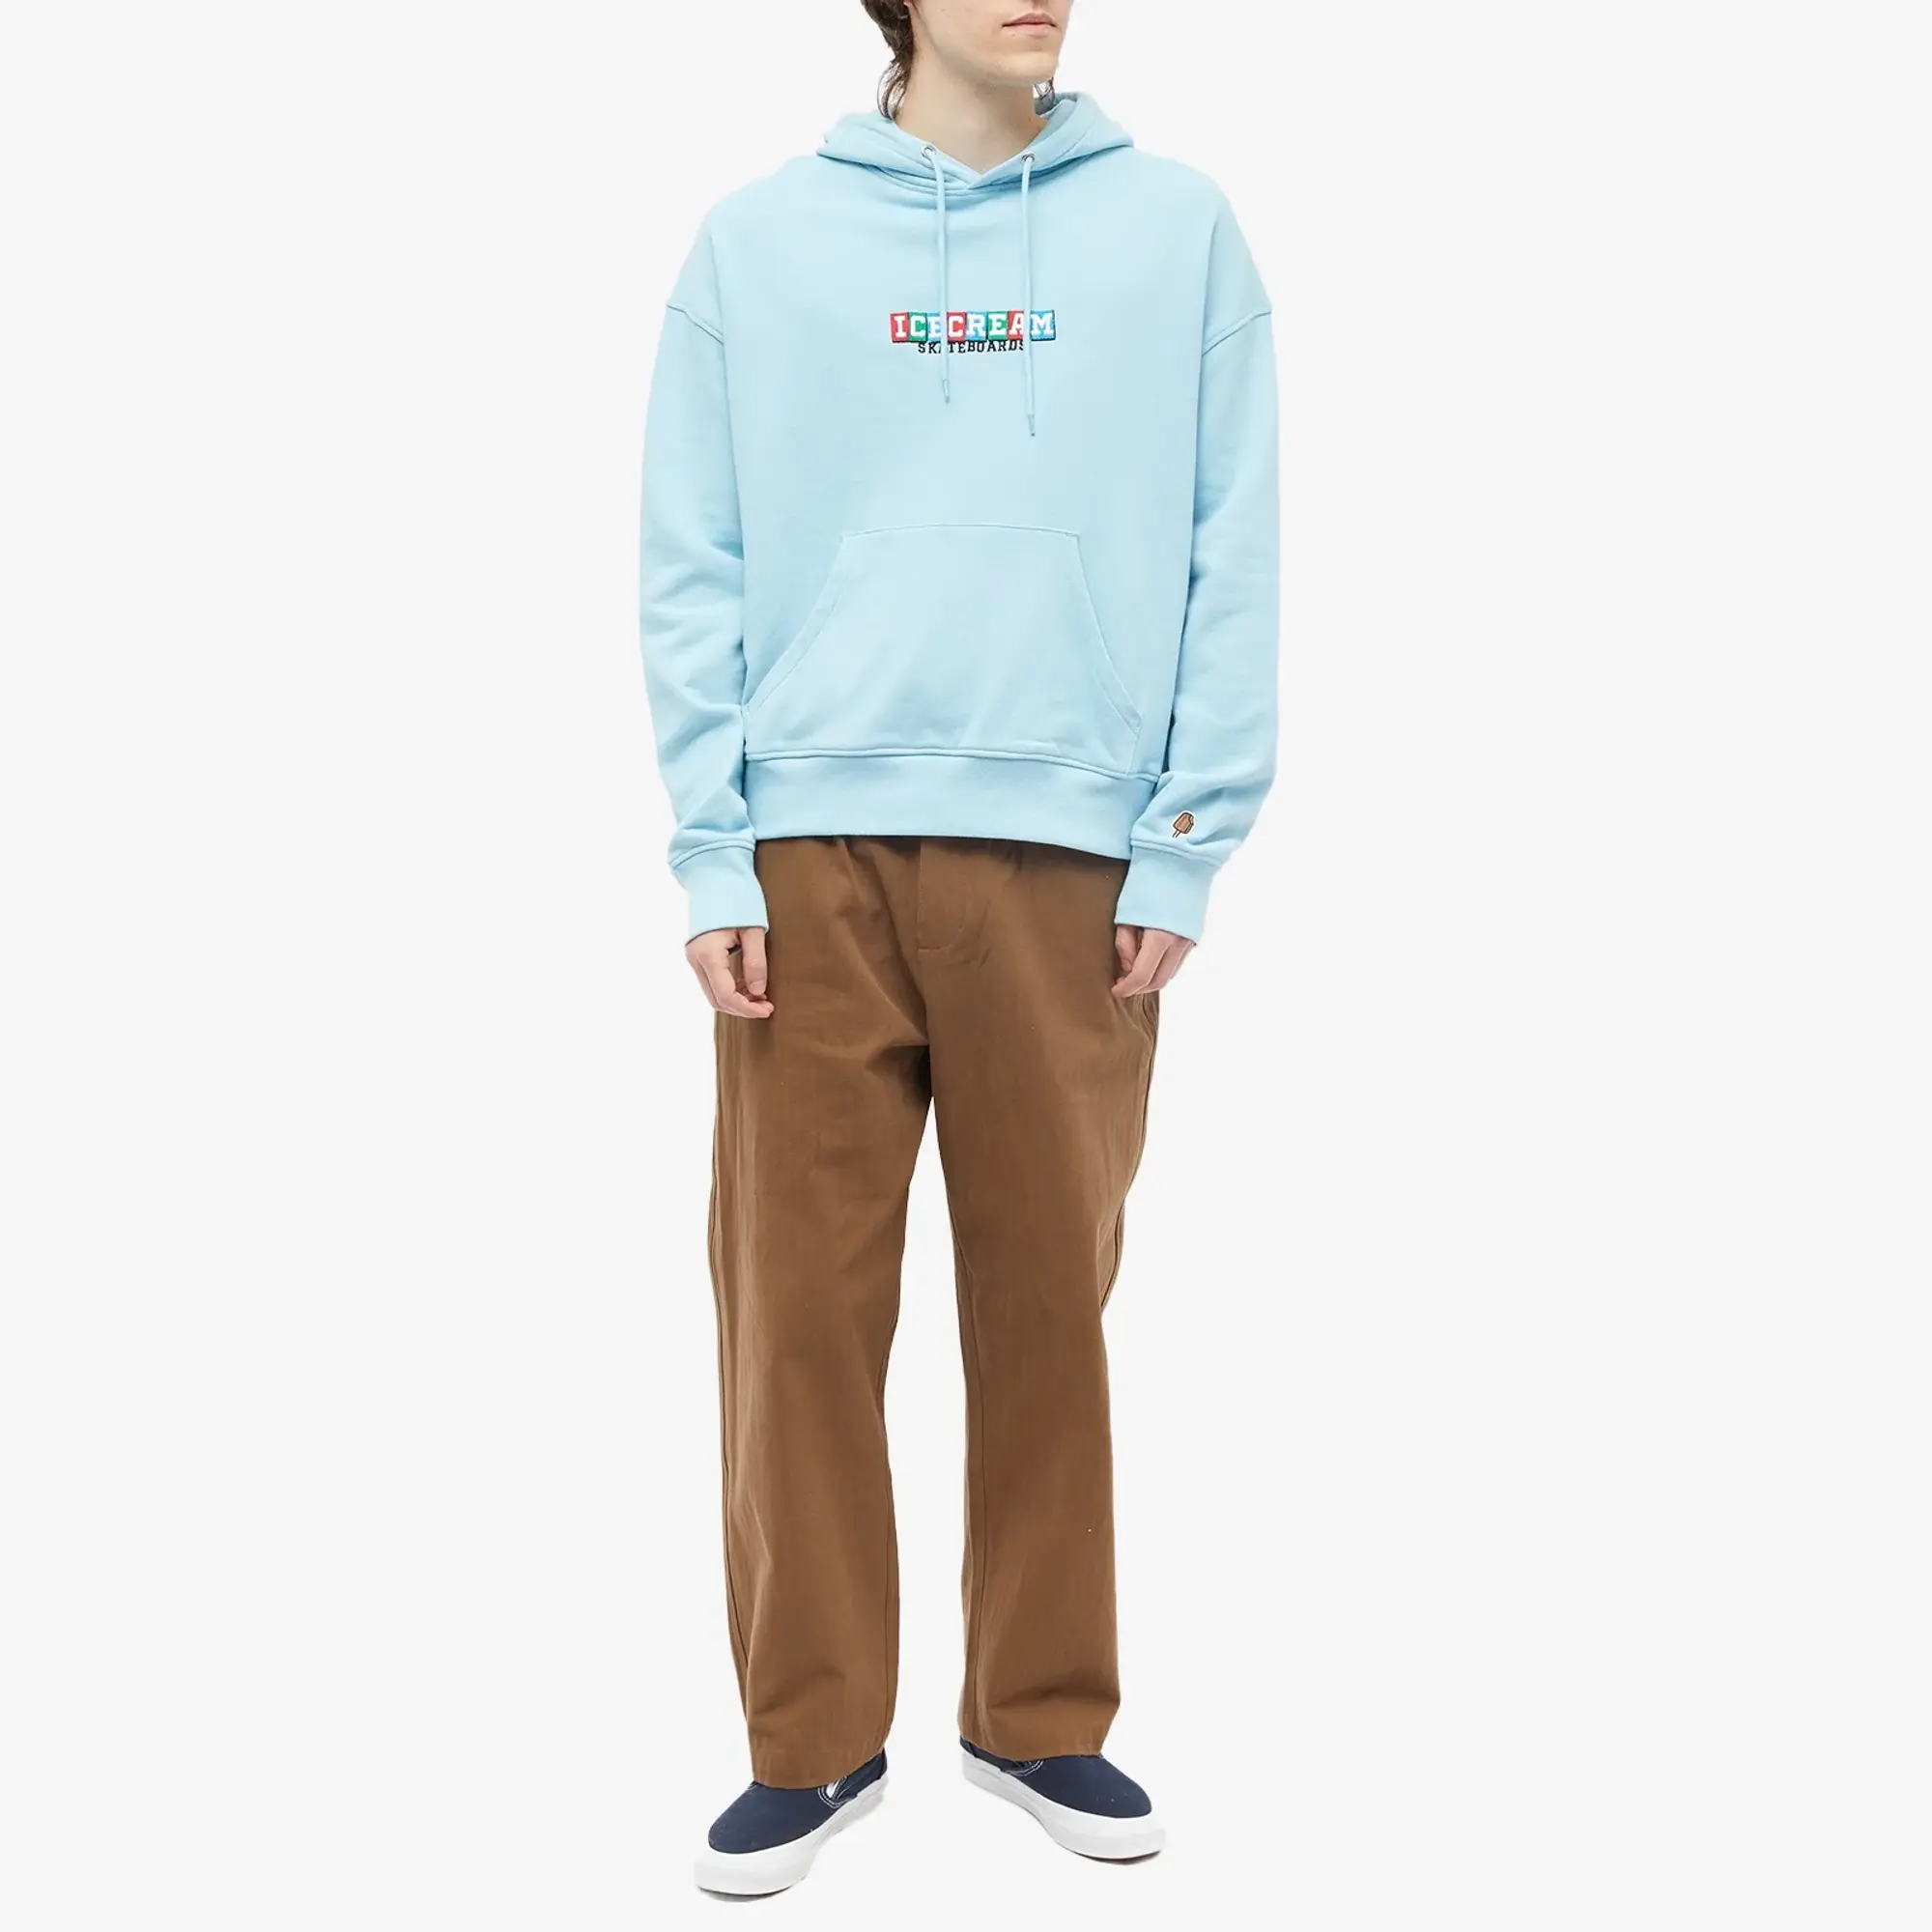 ICECREAM Men's IC Skateboards Embroidered Hoodie Blue